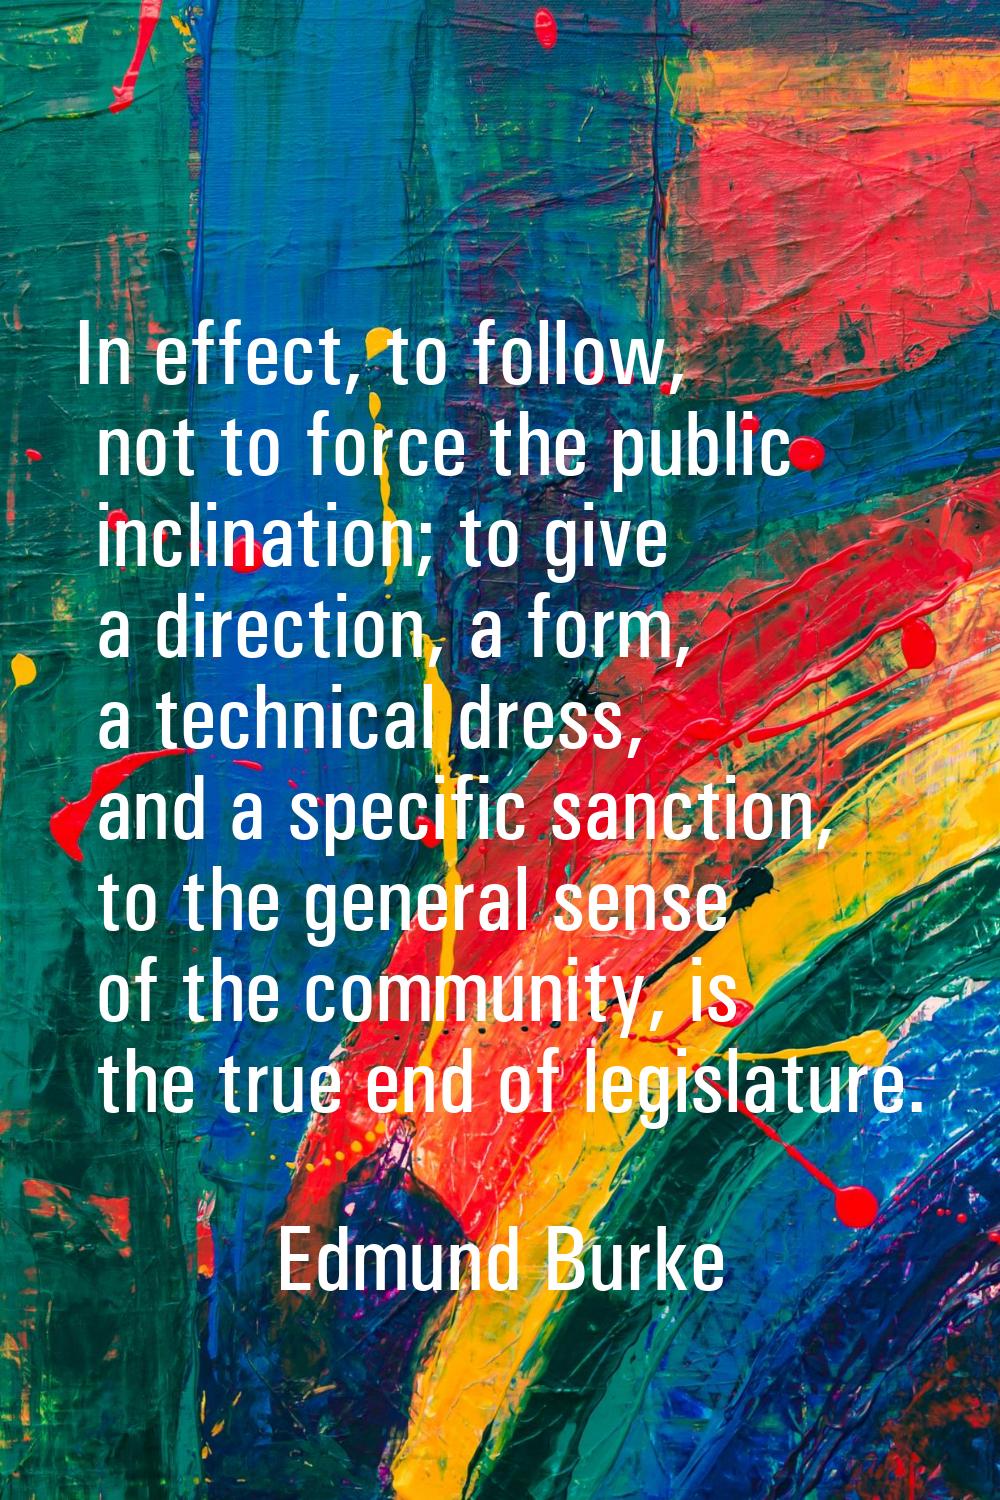 In effect, to follow, not to force the public inclination; to give a direction, a form, a technical